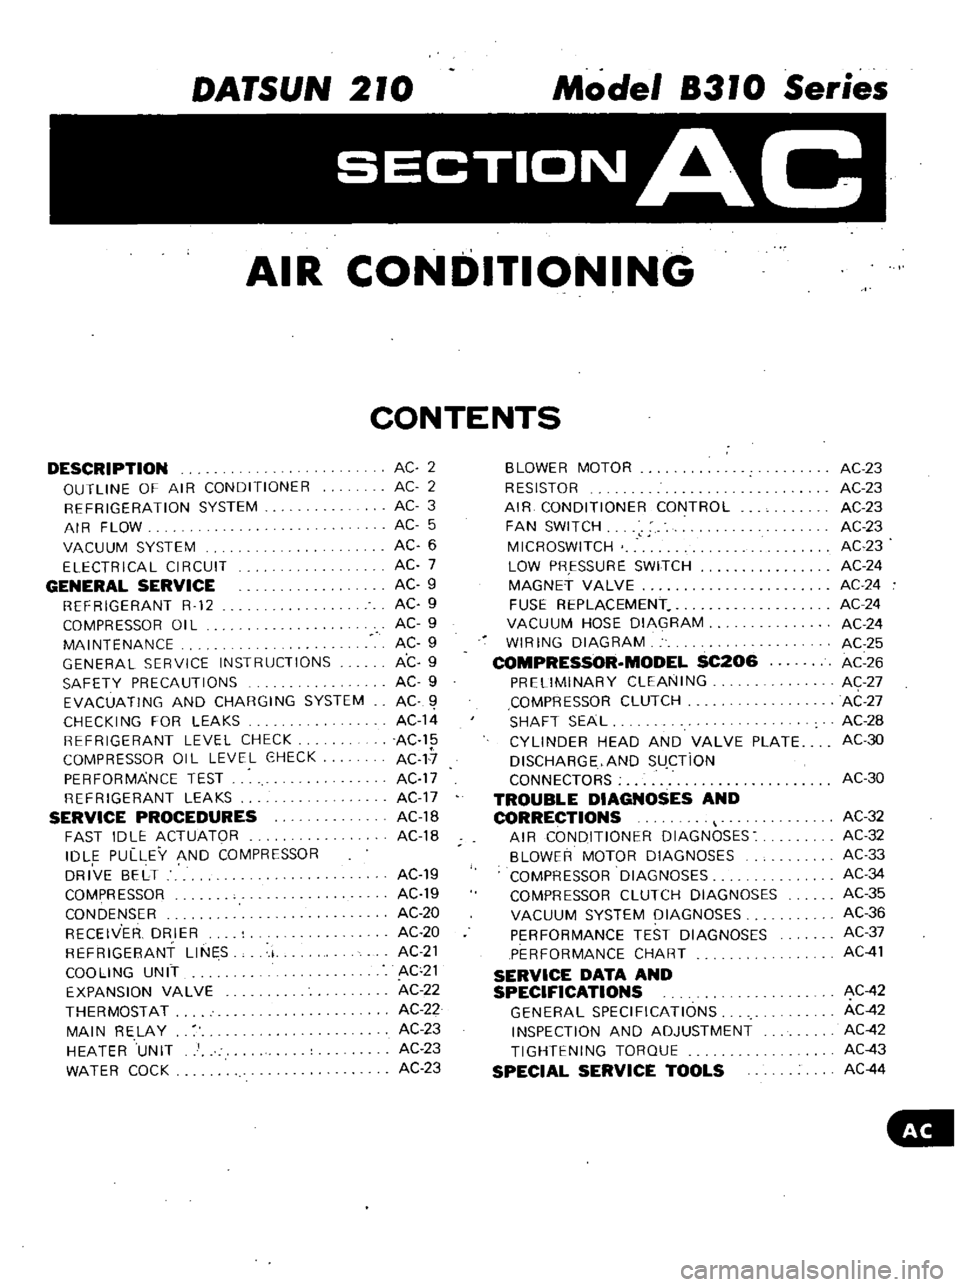 DATSUN 210 1979  Service Manual 
DATSUN

210 
Model

8310 
Series

SECTIONAC

AIR 
CONDITIONING

CONTENTS

DESCRIPTION

OUTLINE 
OF 
AIR 
CONDITIONER

REFRIGERATION 
SYSTEM

AIR 
FLOW

VACUUM 
SYSTEM

ELECTRICAL 
CIRCUIT

GENERAL 
S